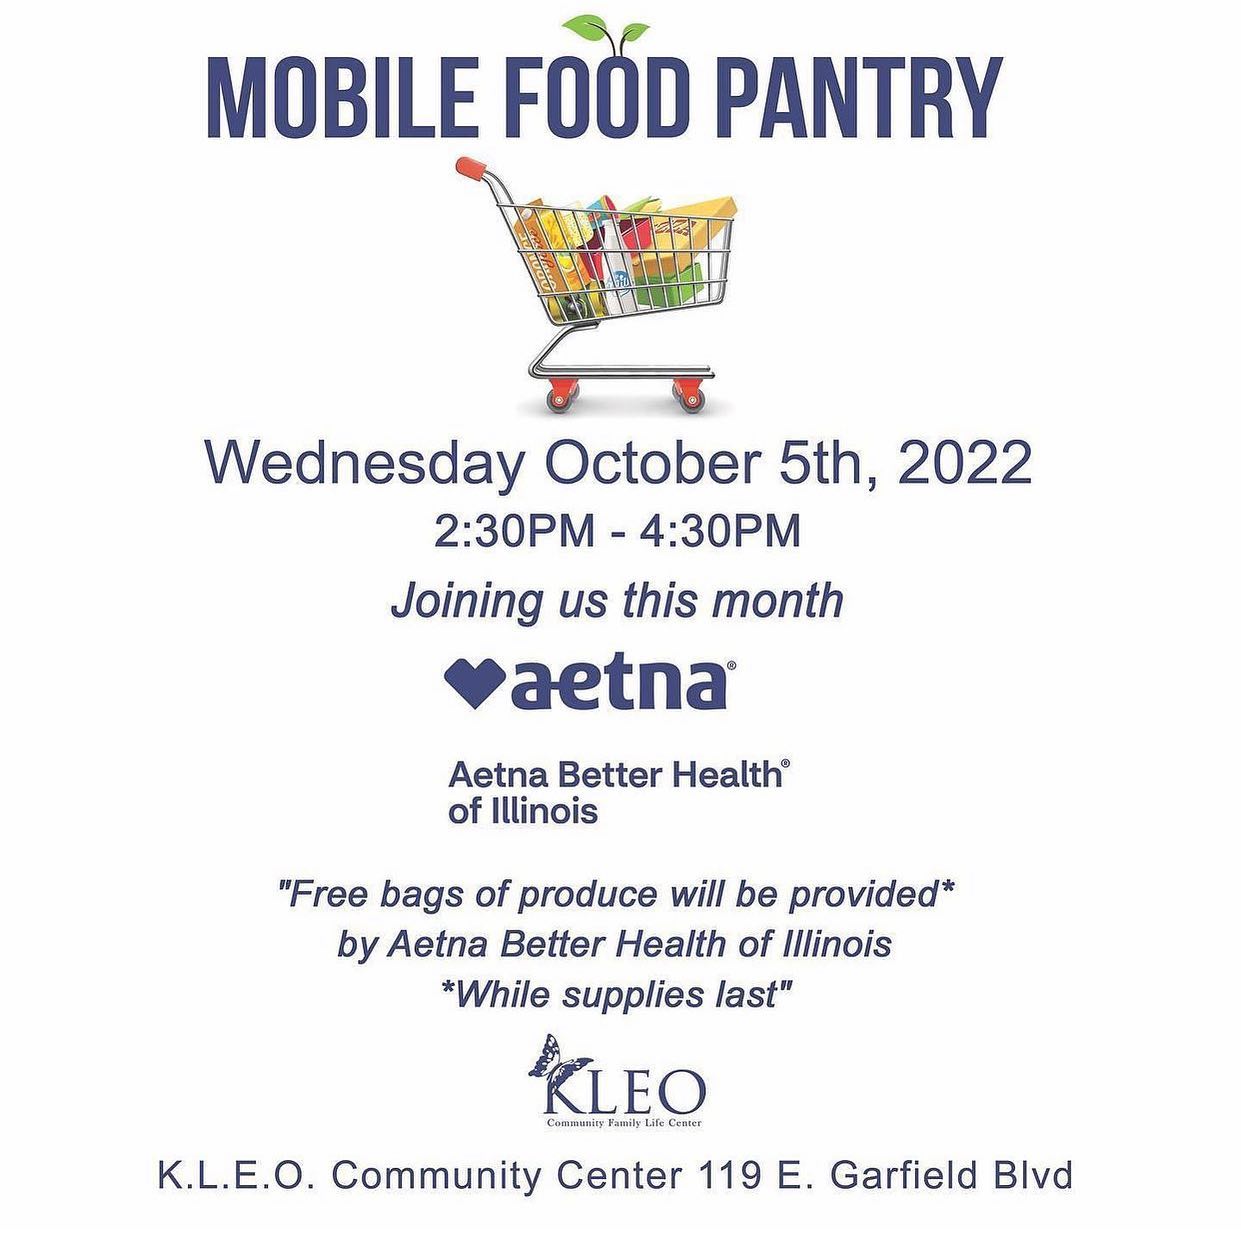 .

Come on and grab some free food next Wednesday!

MOBILE FOOD PANTRY 🥫🛒
Wednesday October 5th, 2022
2:30PM - 4:30PM

Joining us this month
Aetna Better Health® of Illinois "Free bags of produce will be provided* by Aetna Better Health of Illinois *While supplies last"

K.L.E.O. Community Center 119 E. Garfield Blvd

#mobilefoodpantry #kleo #kleocommunitycenter #keeplovingeachother #foodpantry #freefood #foodgiveaway #groceries #washingtonpark #aetnabetterhealth